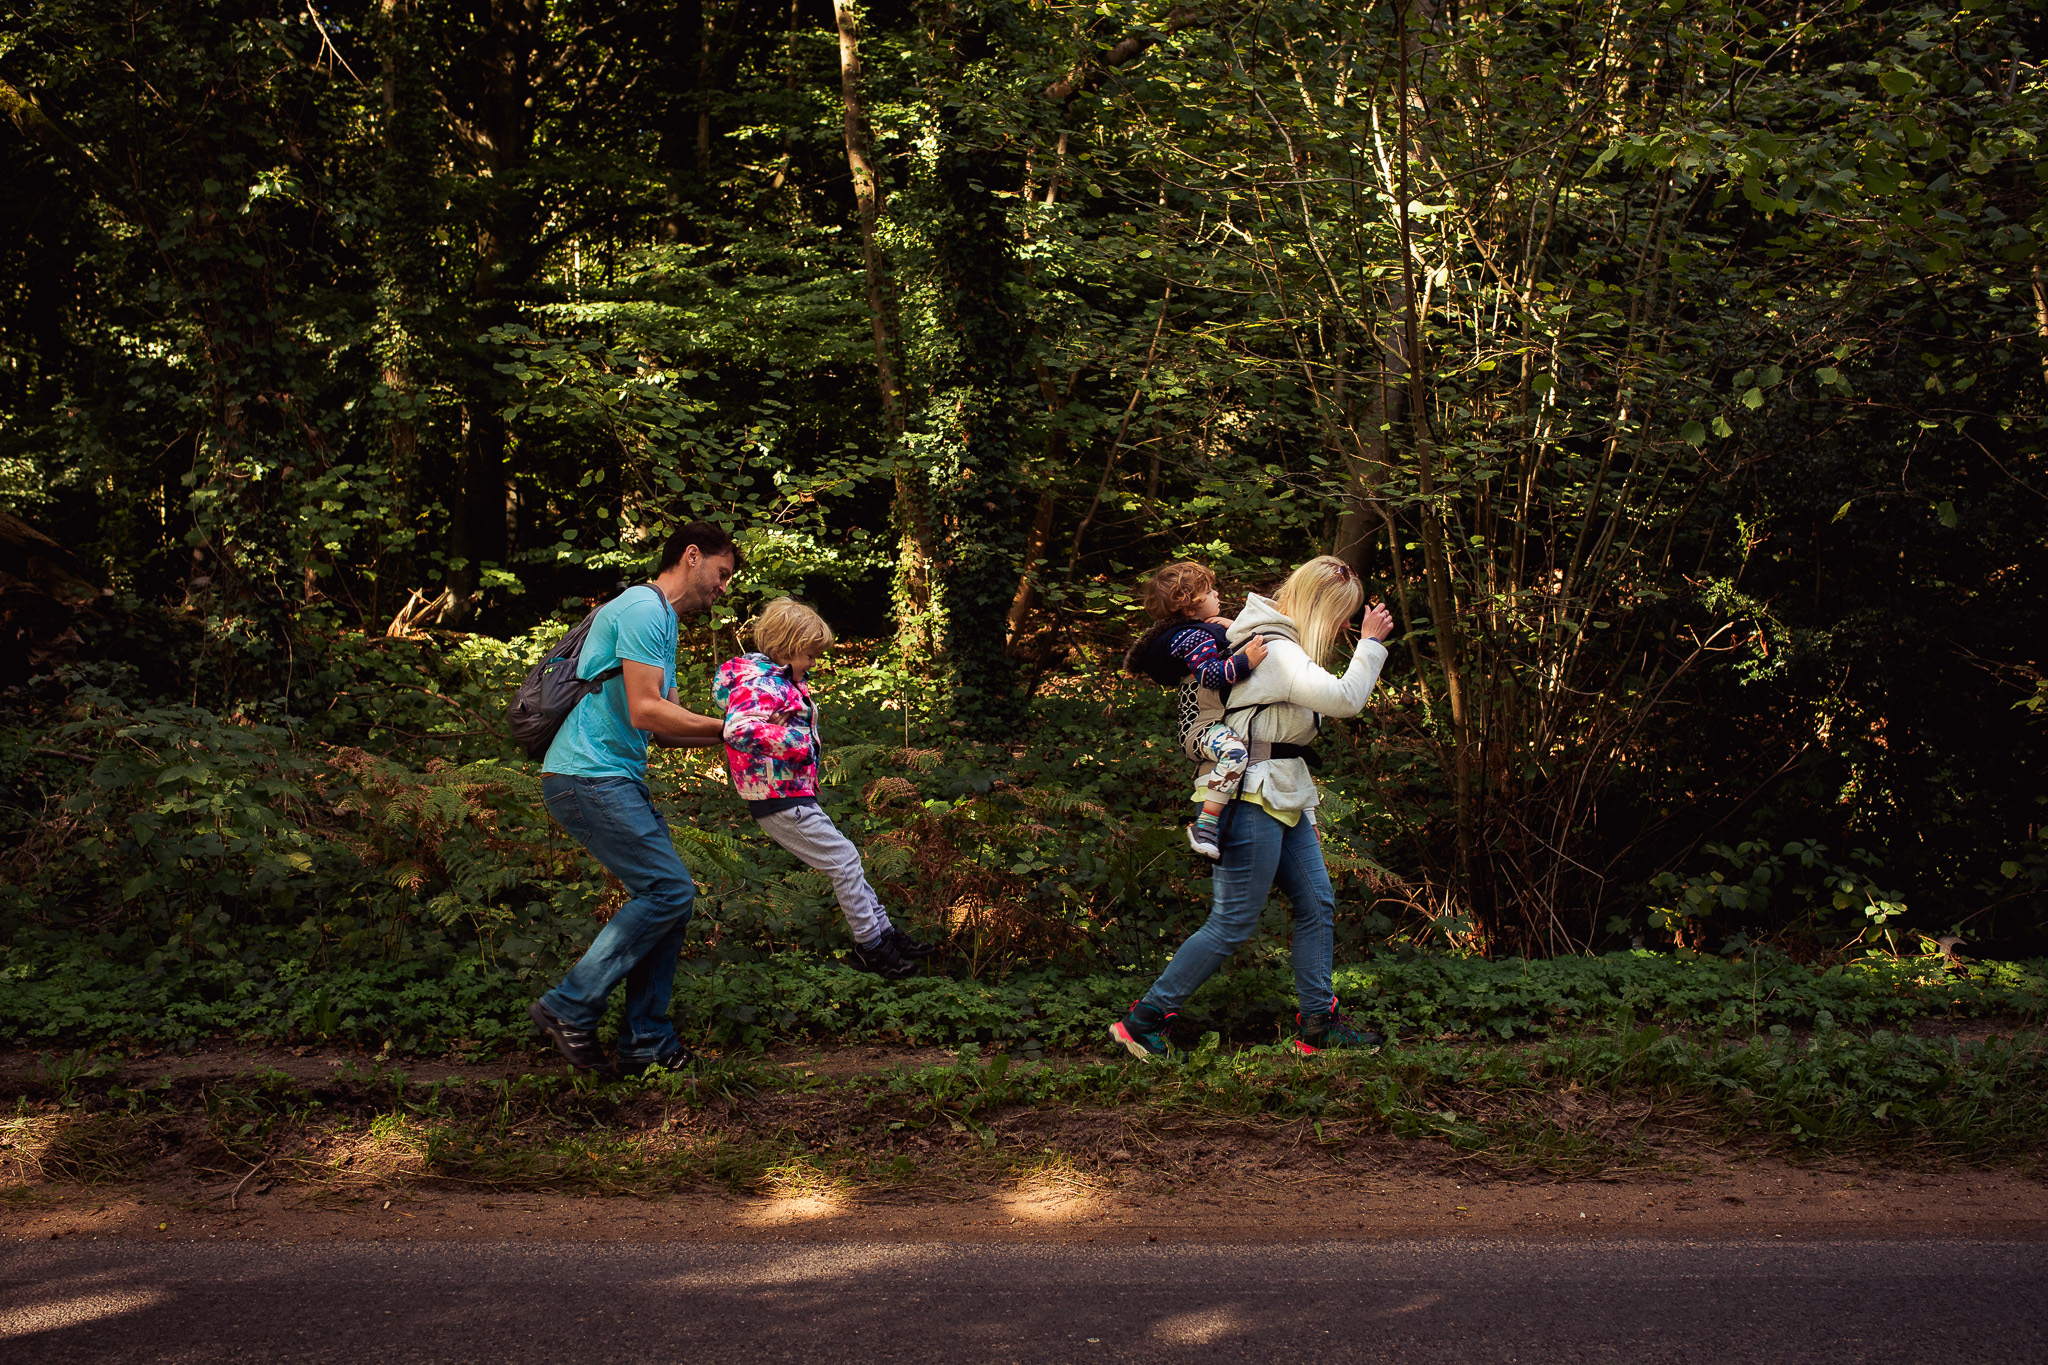 A family of four walking in a line along the road in a forest during a family photo session.